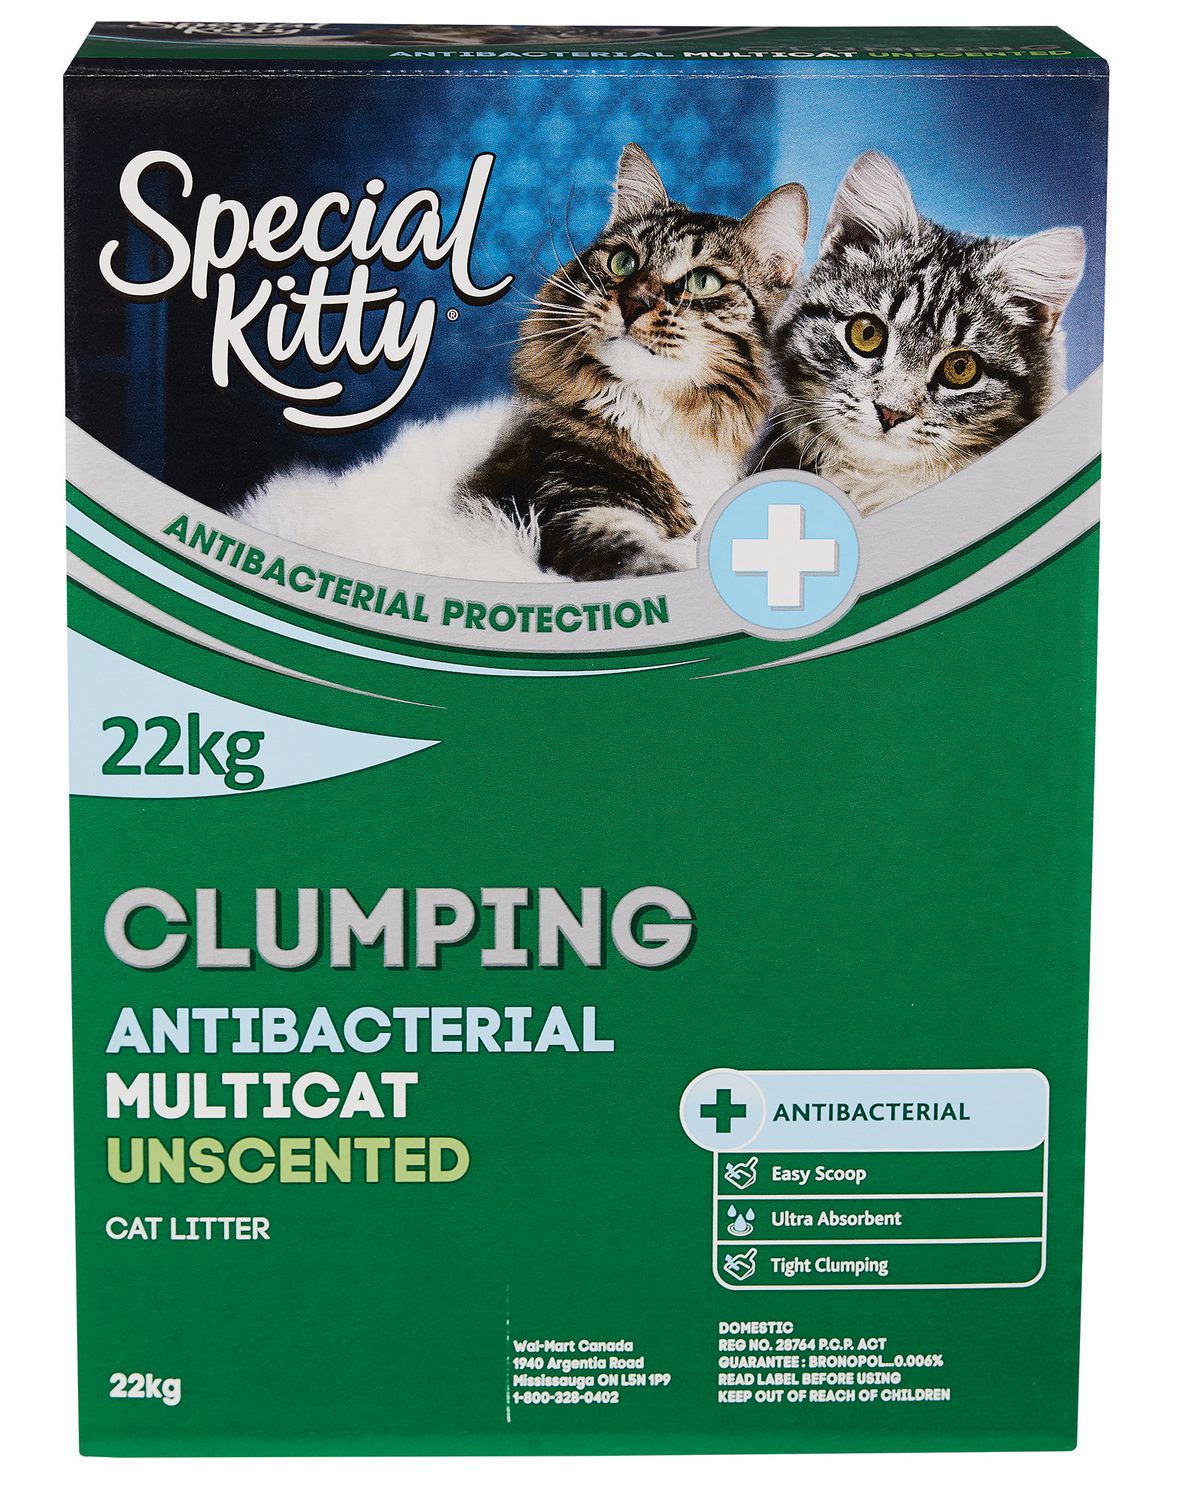 Special Kitty® Clumping Antibacterial Multicat Unscented Cat Litter